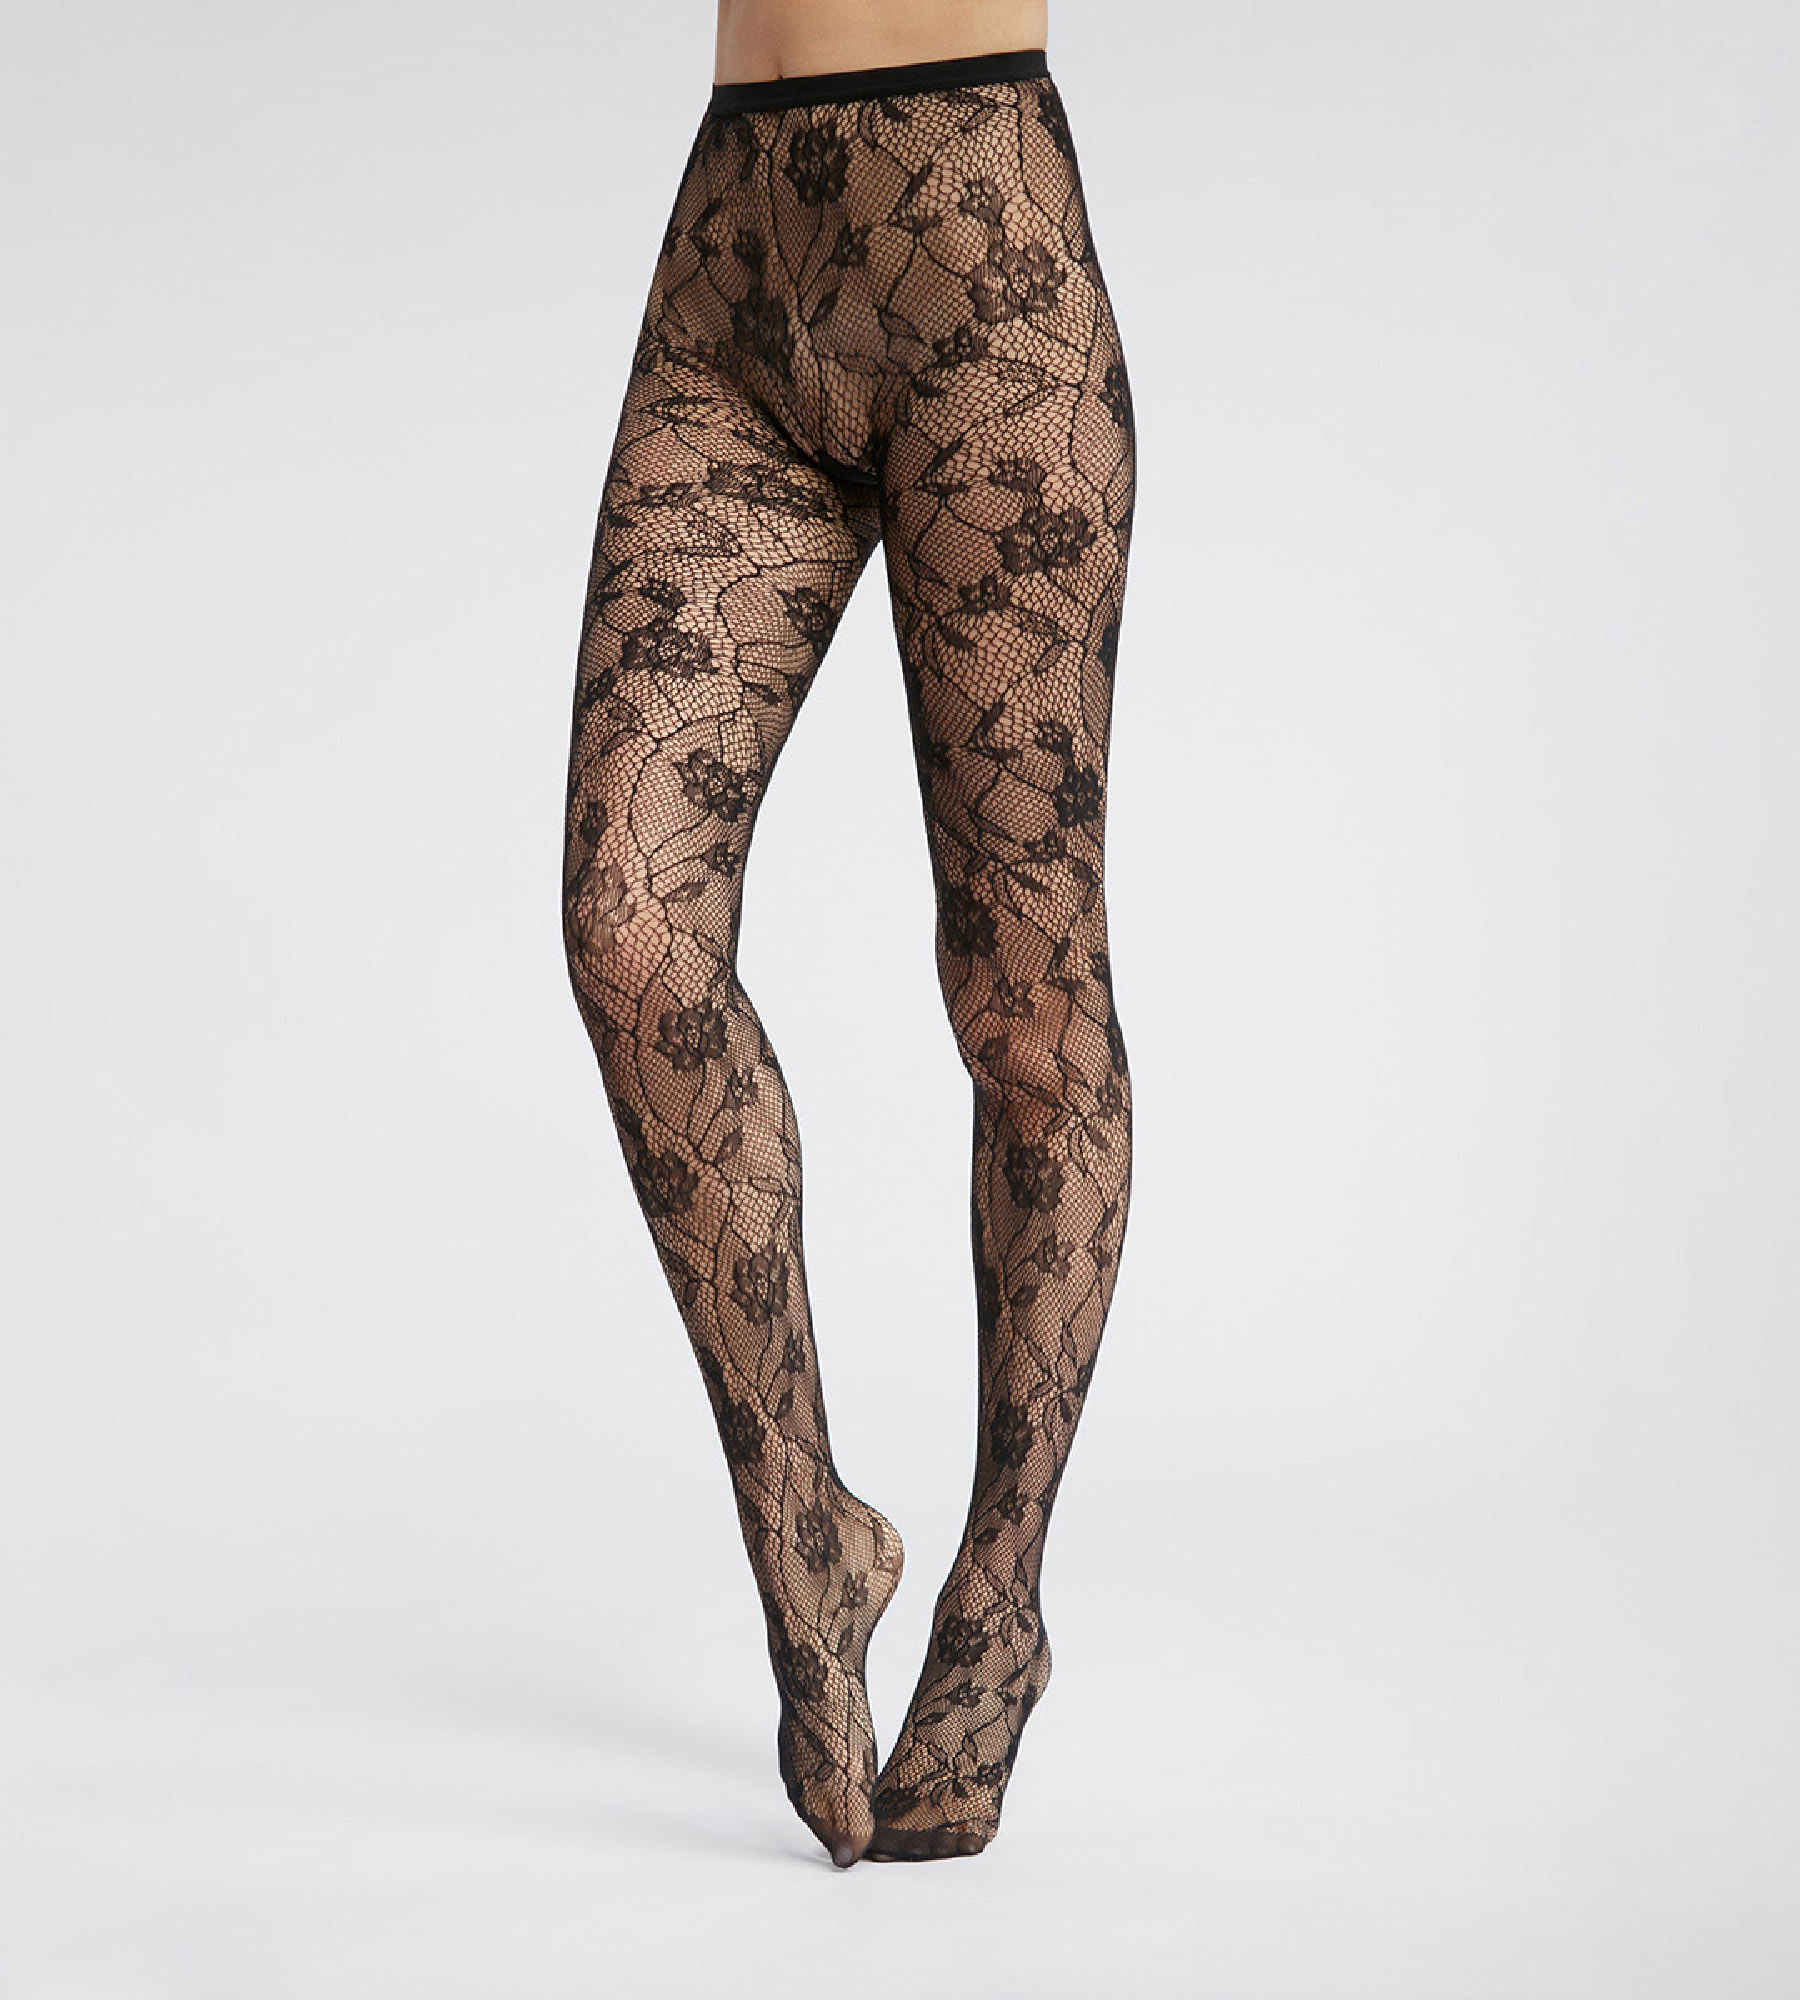 Women's Black Lace Print Fishnets High Waisted Tights with Faux Panty